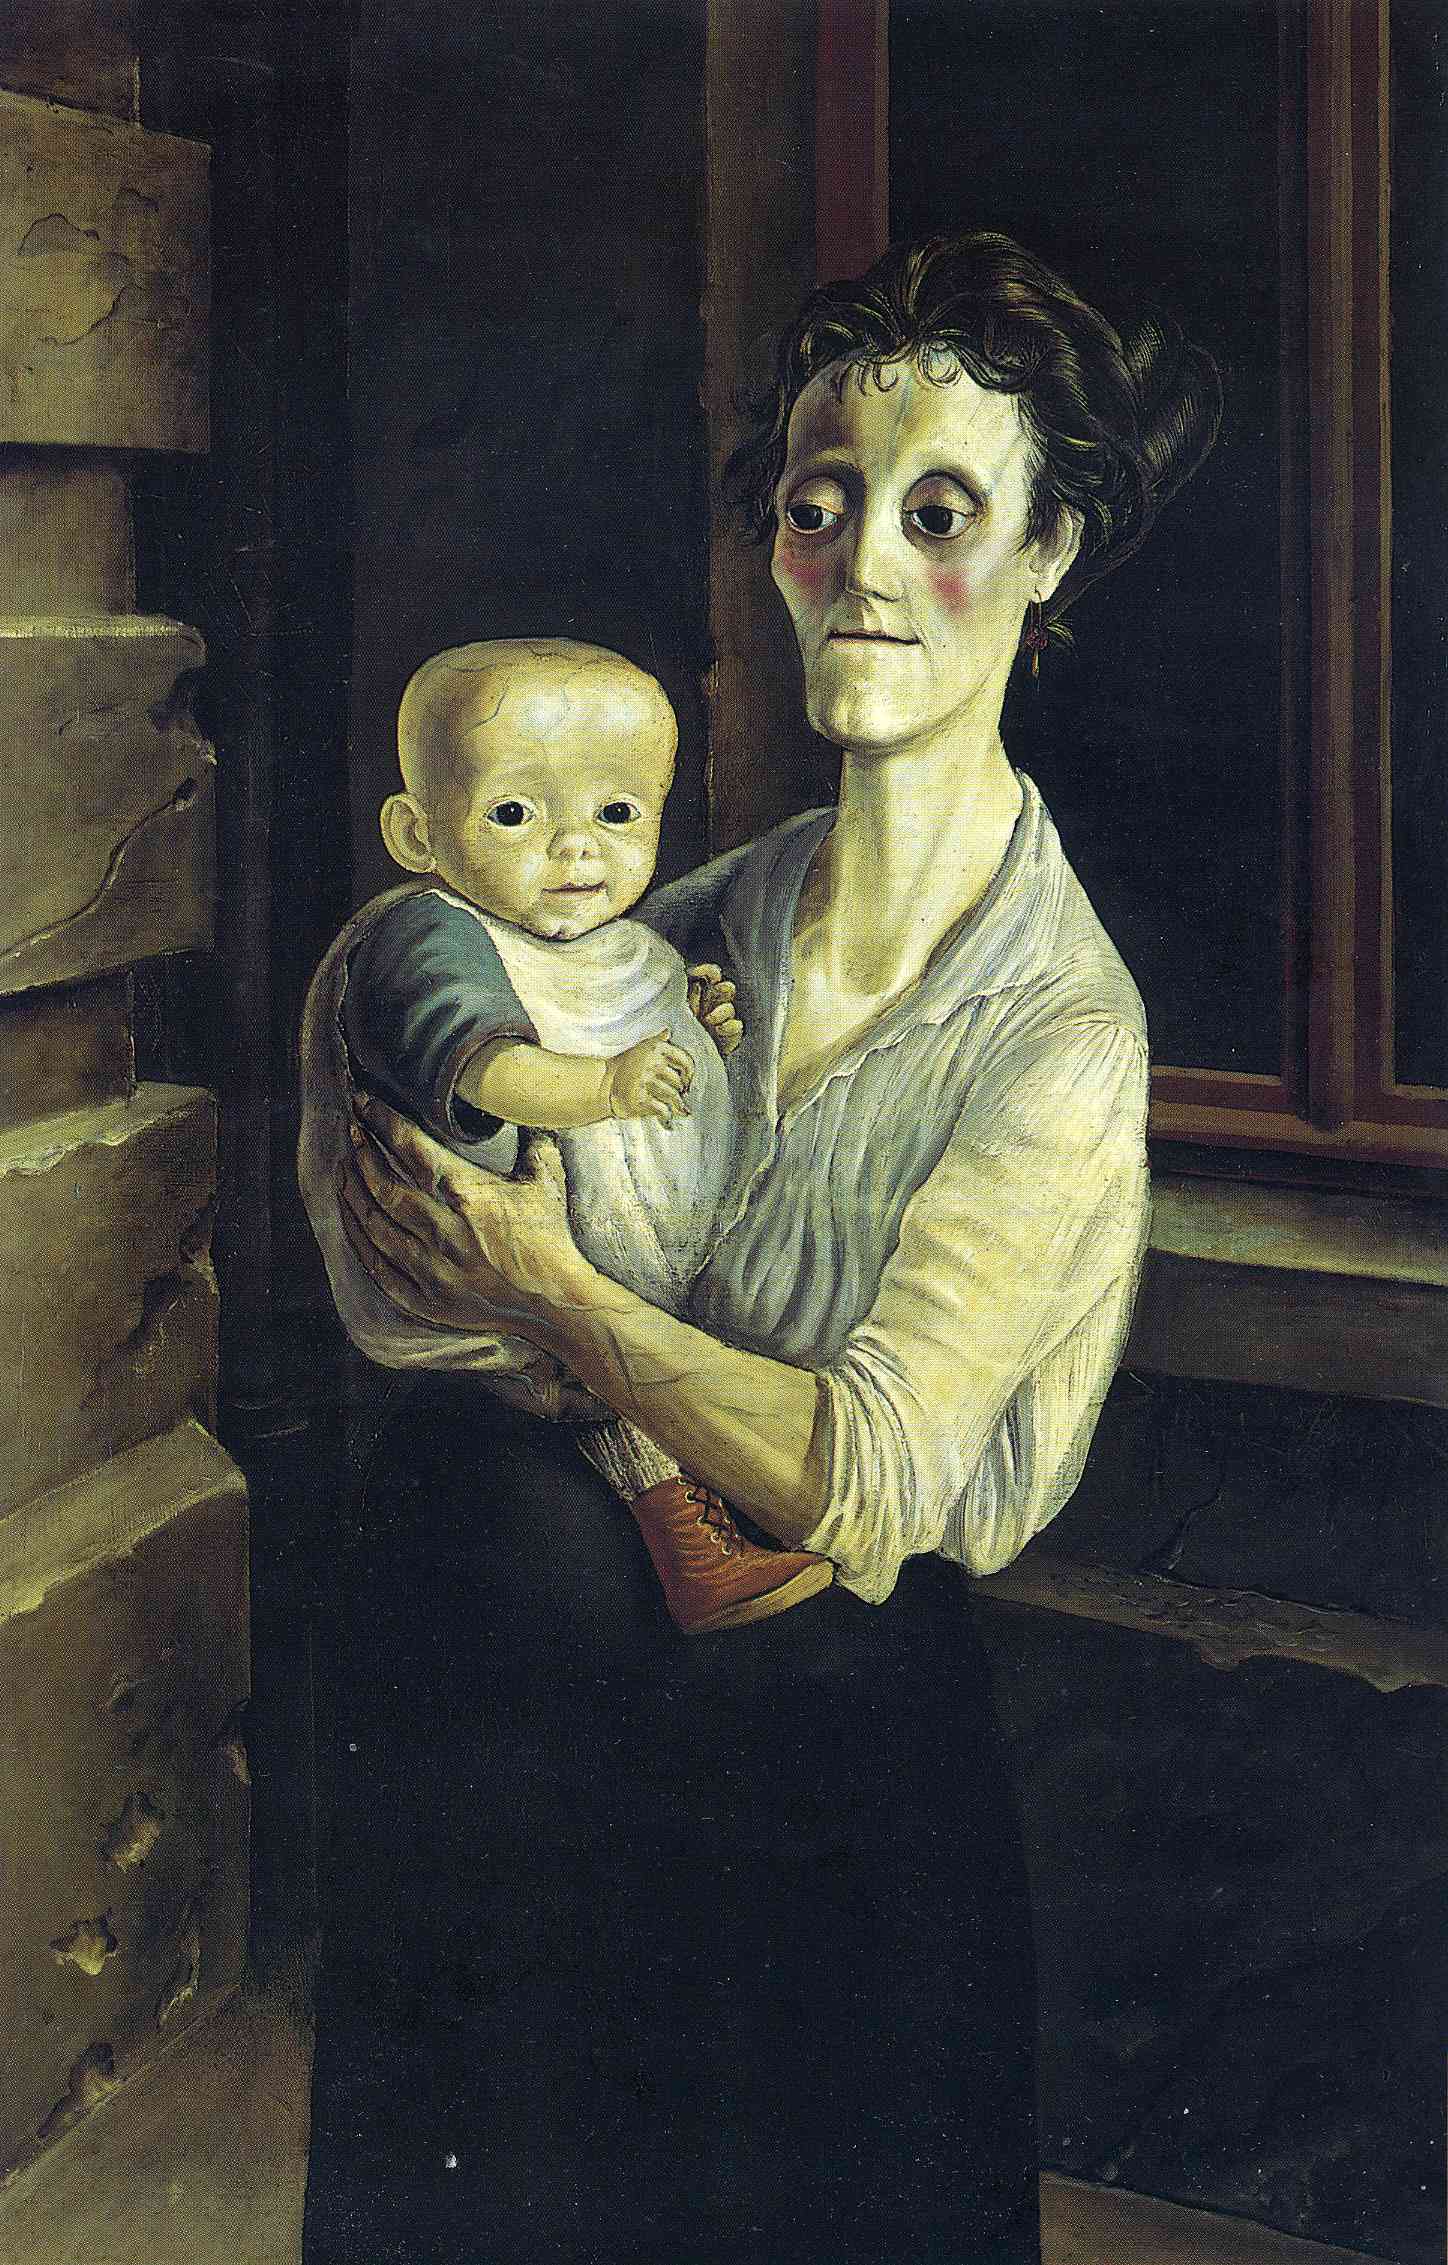 http://uploads1.wikiart.org/images/otto-dix/mother-with-child-1921.jpg